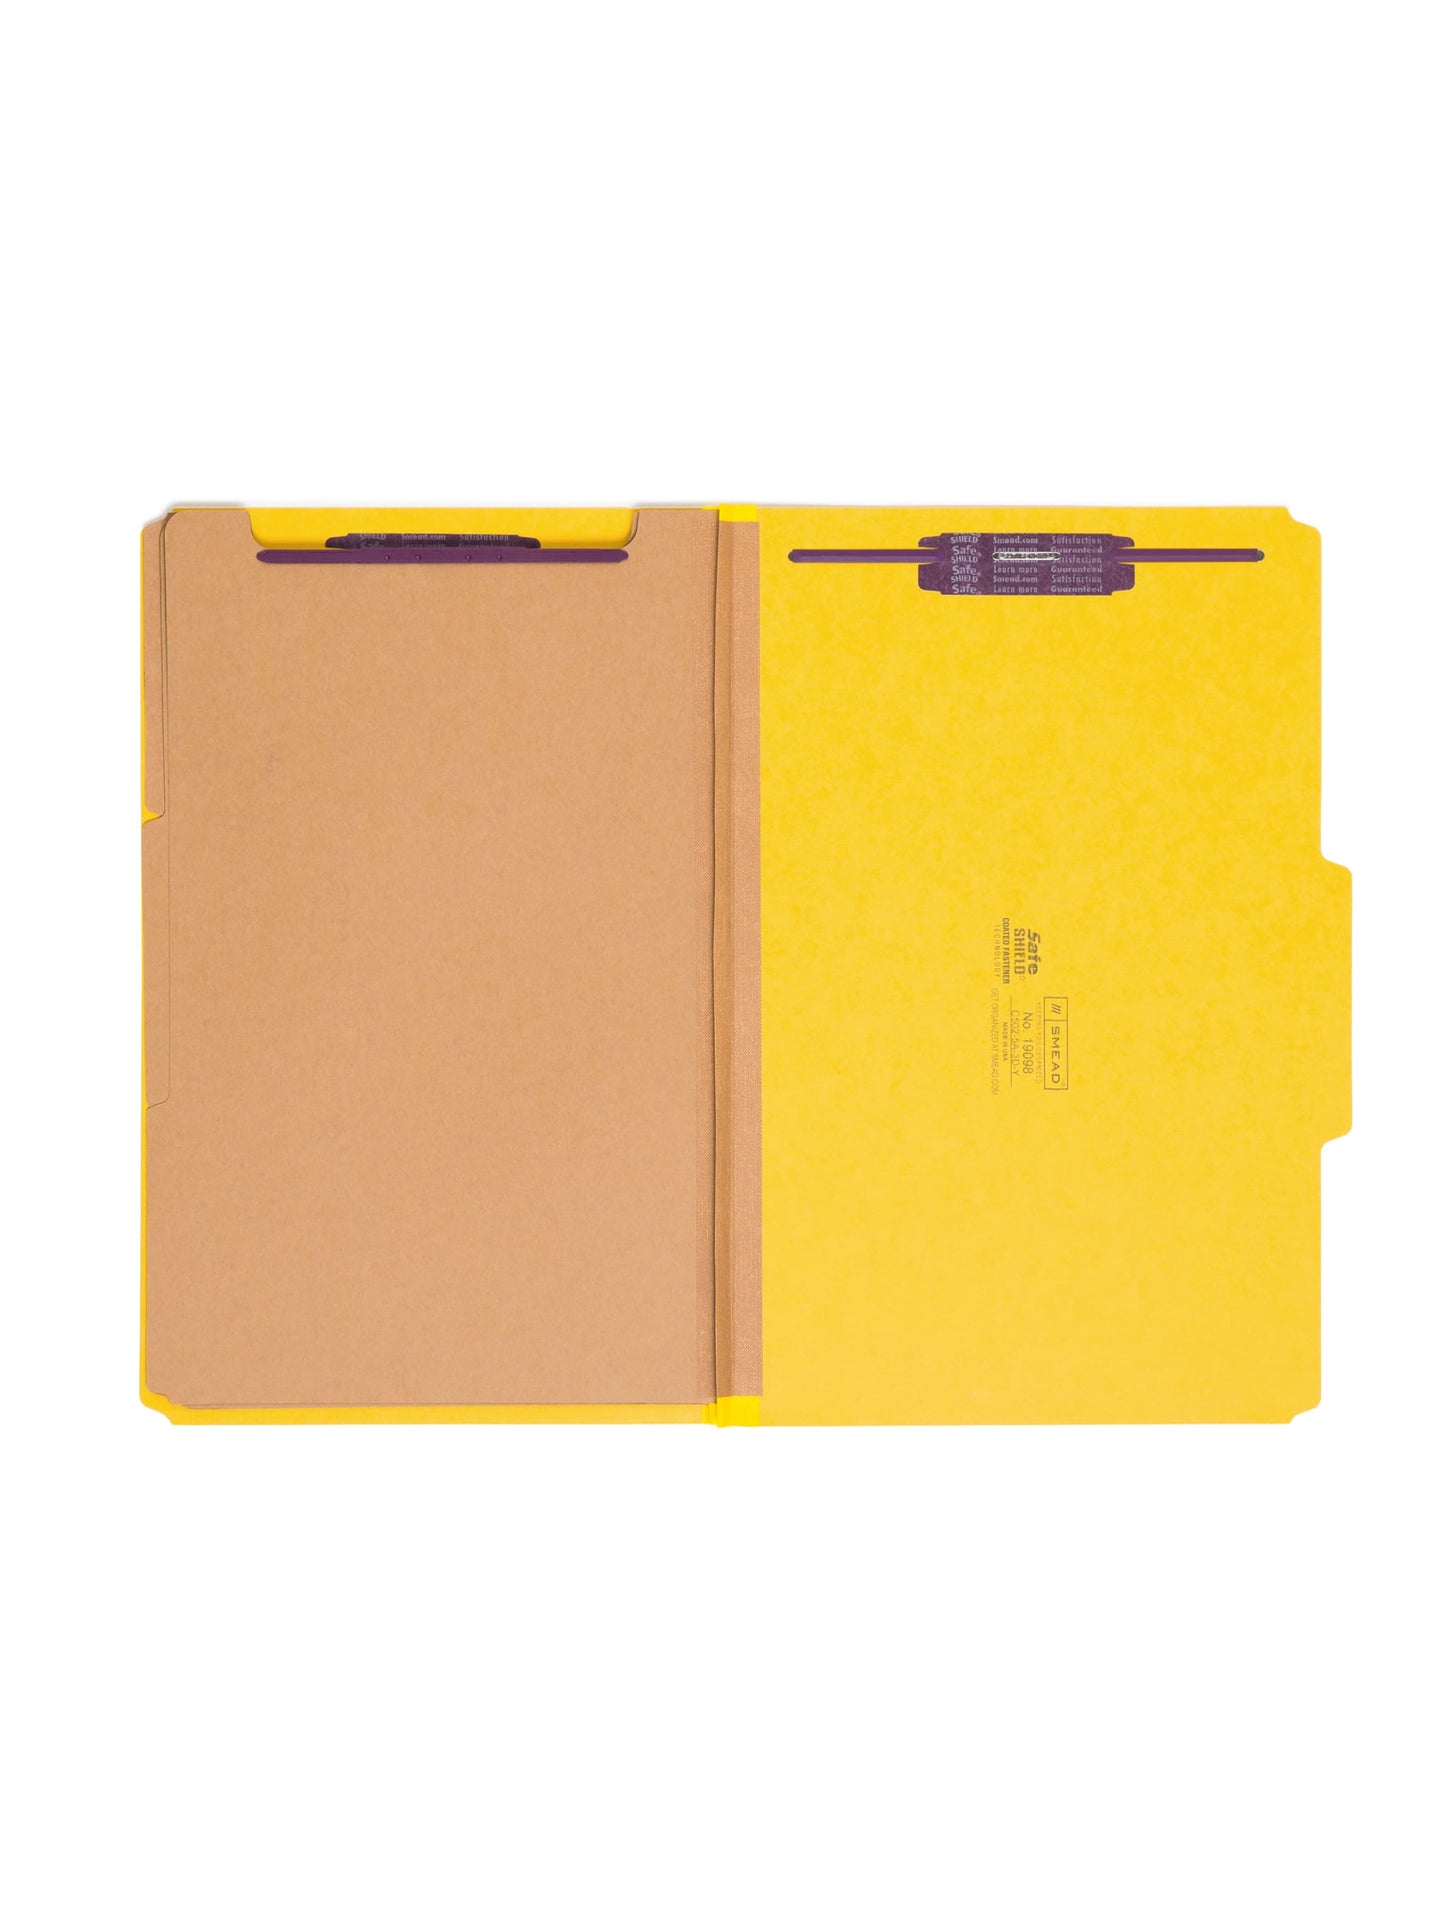 SafeSHIELD® Pressboard Classification File Folders, 3 Dividers, 3 inch Expansion, 2/5-Cut Tab, Yellow Color, Legal Size, Set of 0, 30086486190986